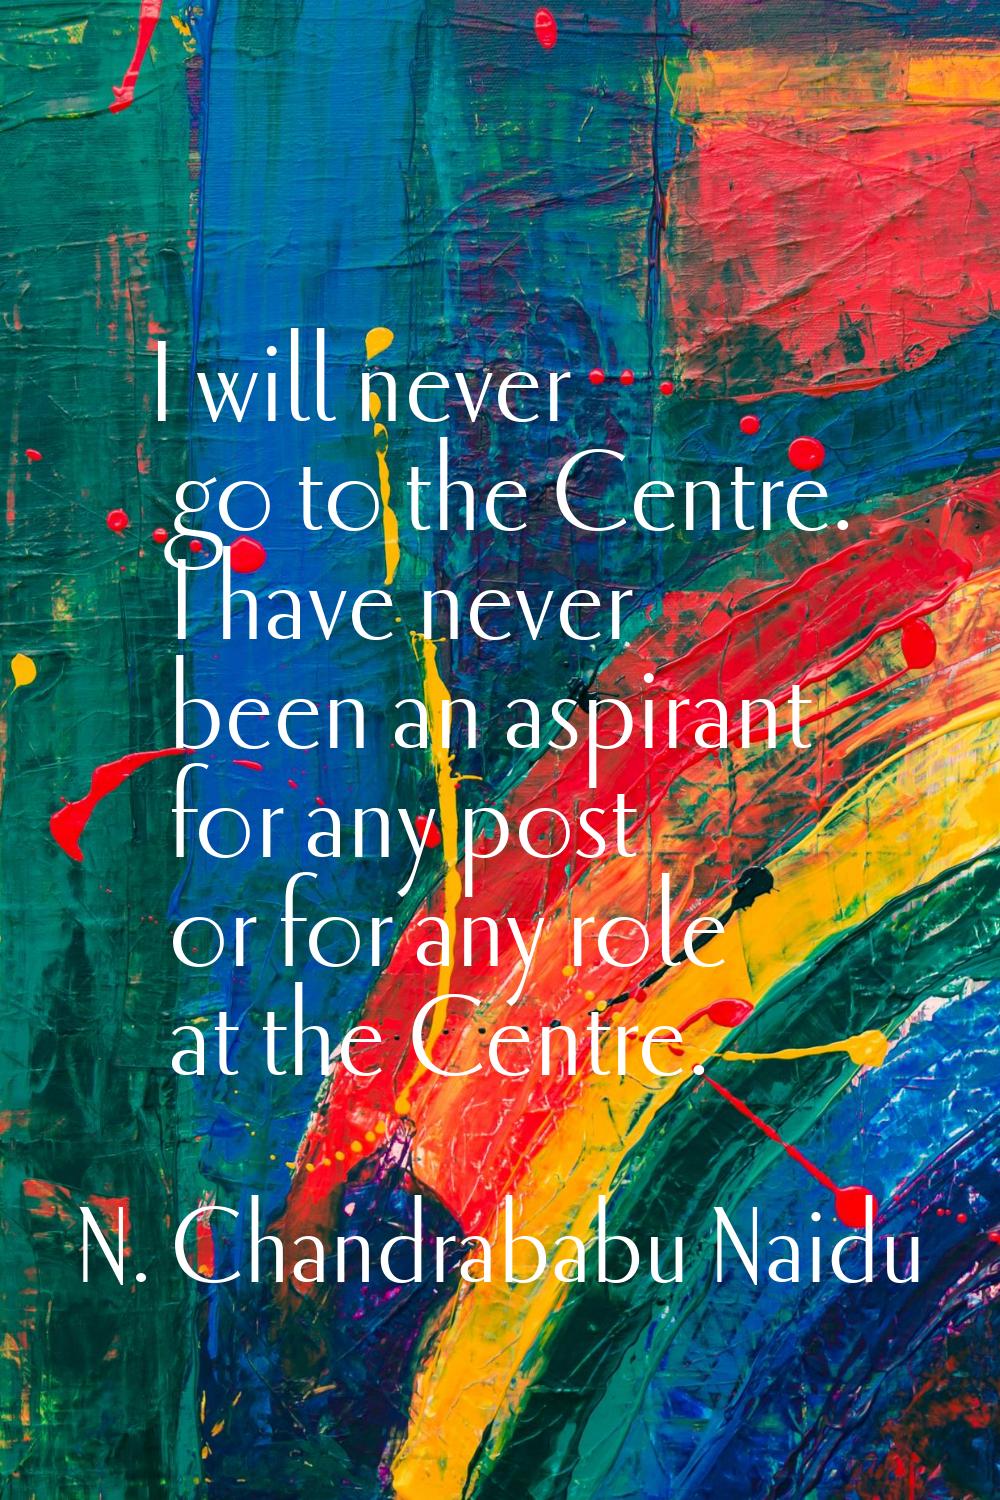 I will never go to the Centre. I have never been an aspirant for any post or for any role at the Ce